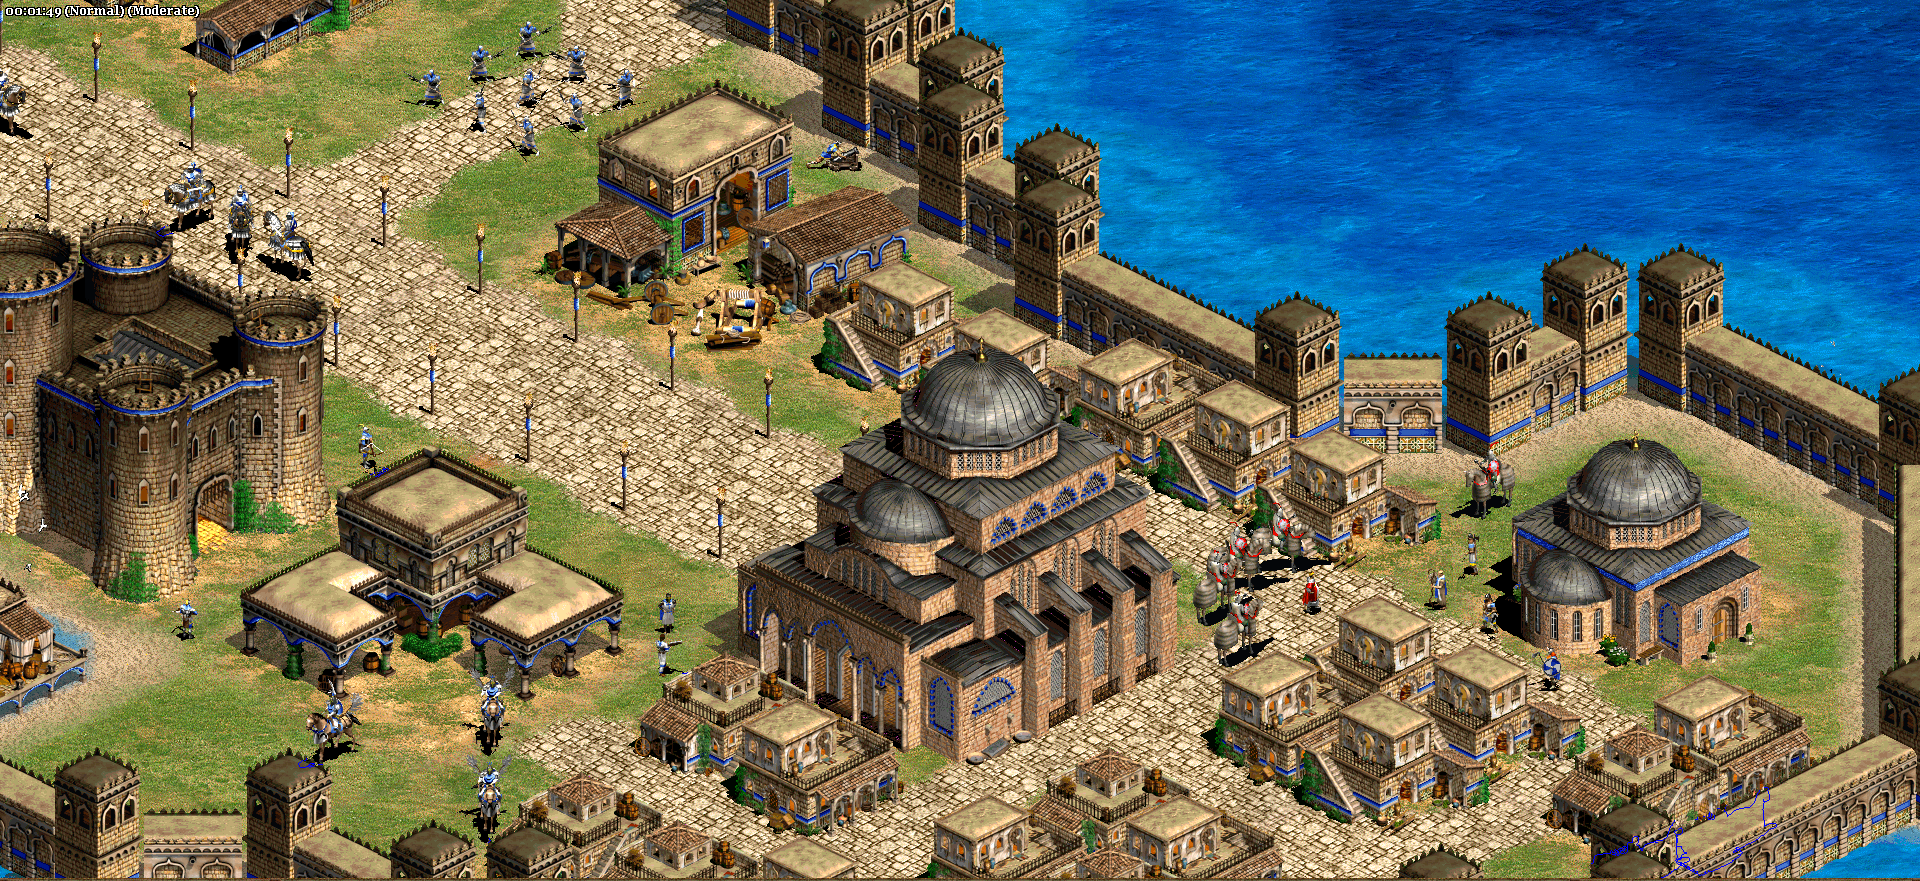 Age of Empires II the Conquerors. Age of Empires Conquerors. Age of Empires 2 the Conquerors. Age of Empires II the age of Kings. Age of conquerors